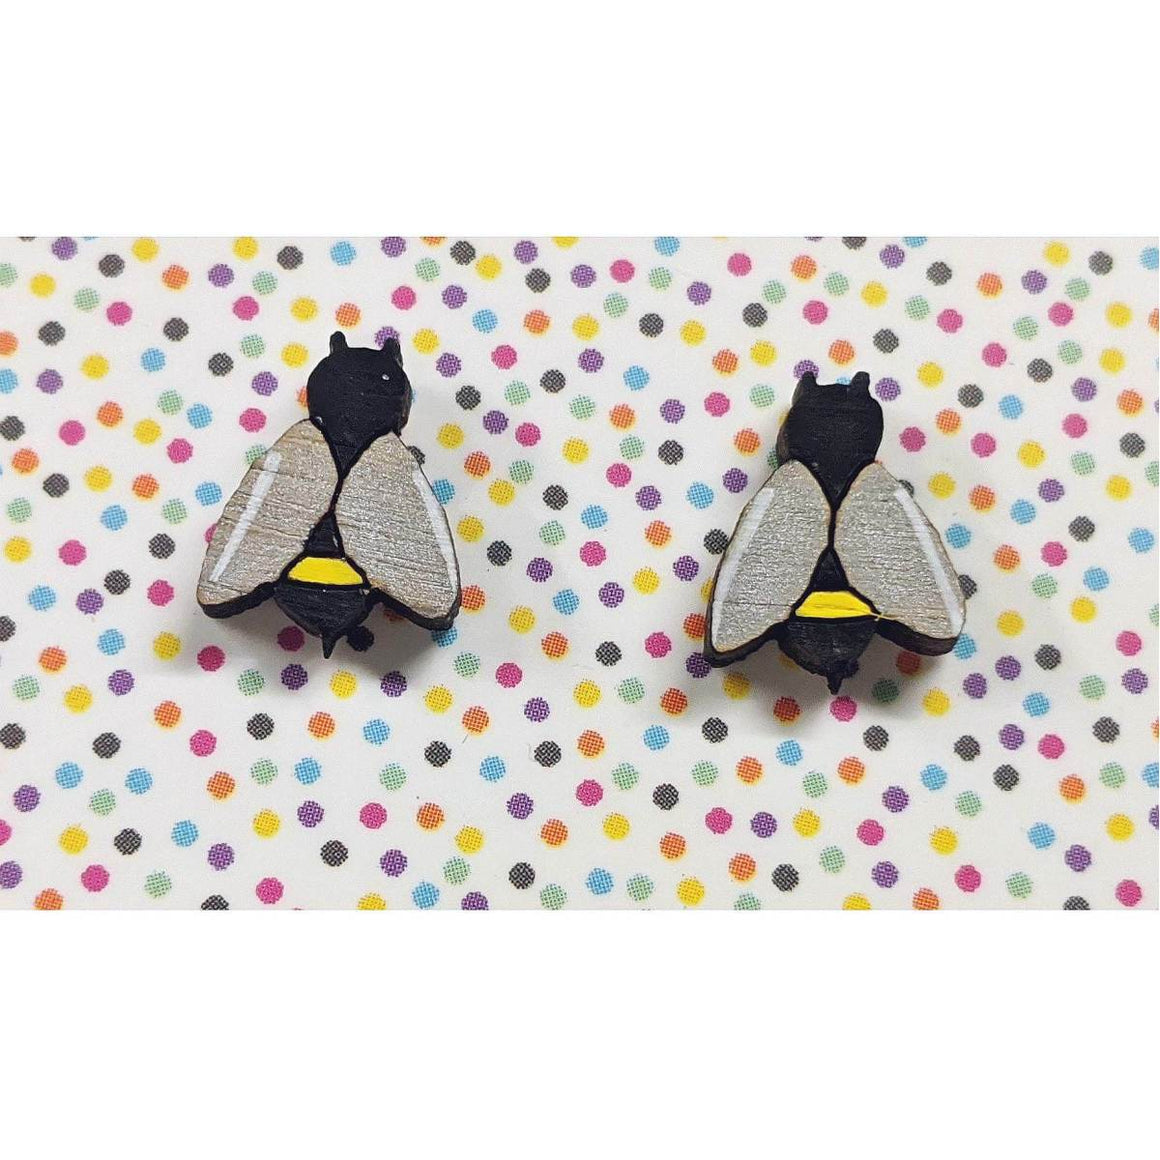 A pair of intricately hand coloured studs depicting honey bees. In yellow and black stripes, their wings are painted in a lustrous silver. Shown on a rainbow polka dot background.